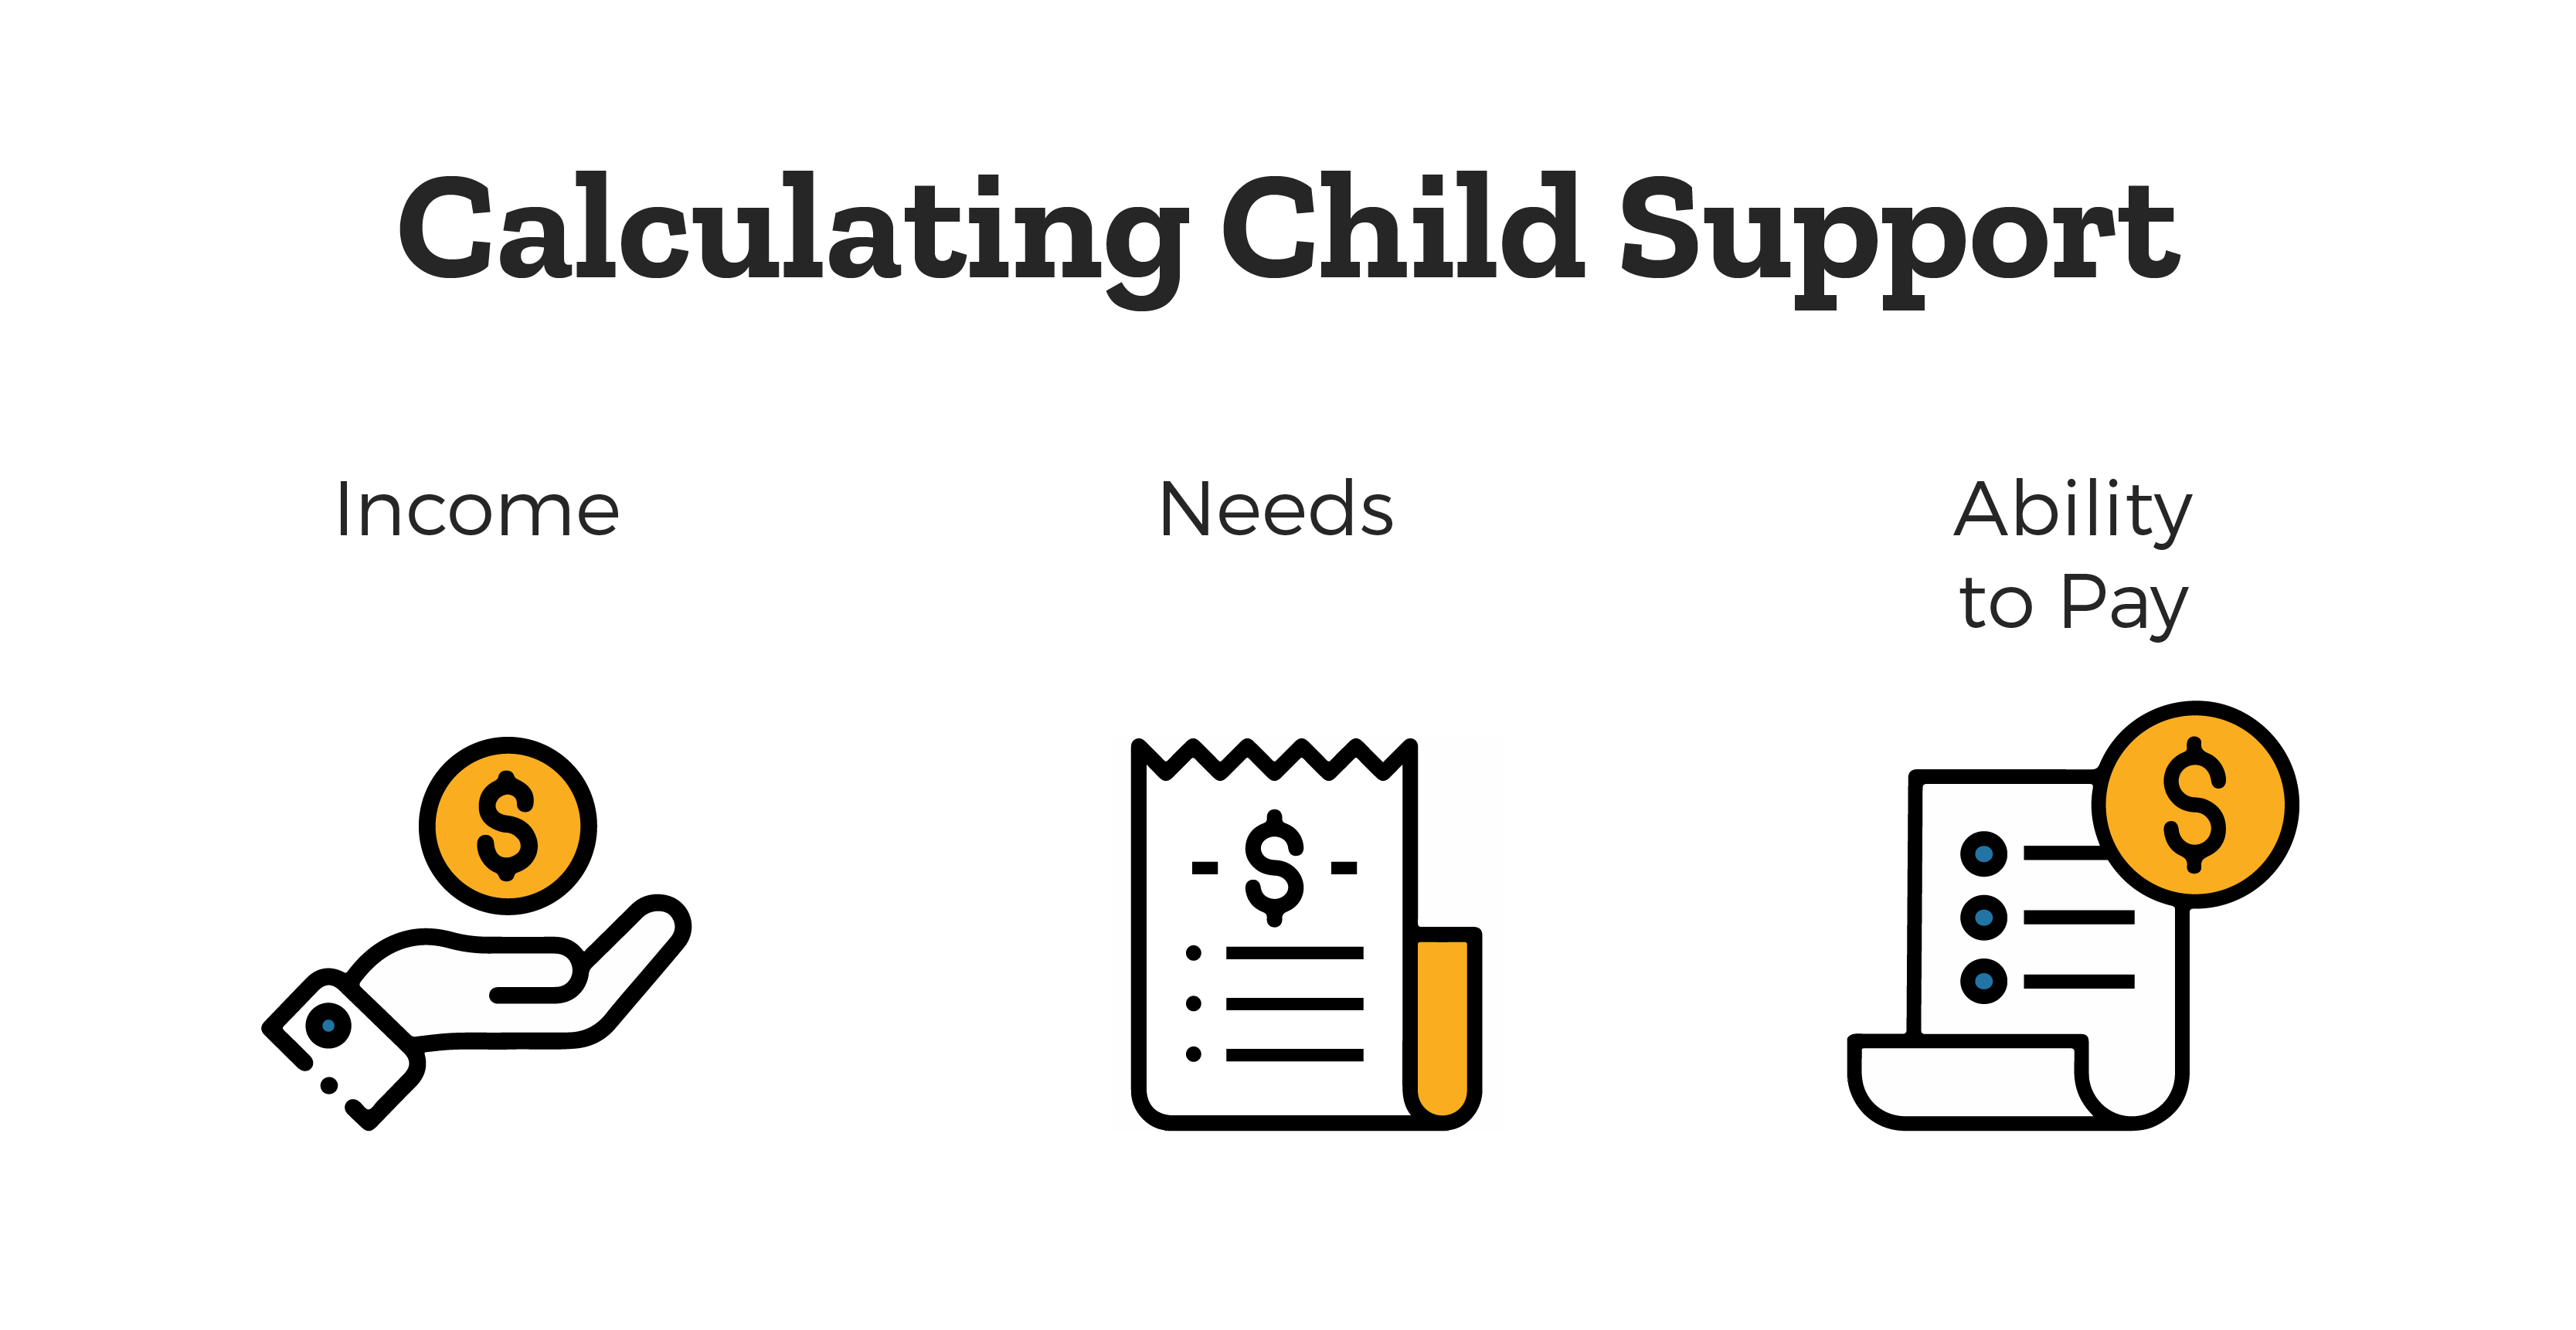 Calculating Child Support - a graphic showing the amount is determined by income, needs, and ability to pay.